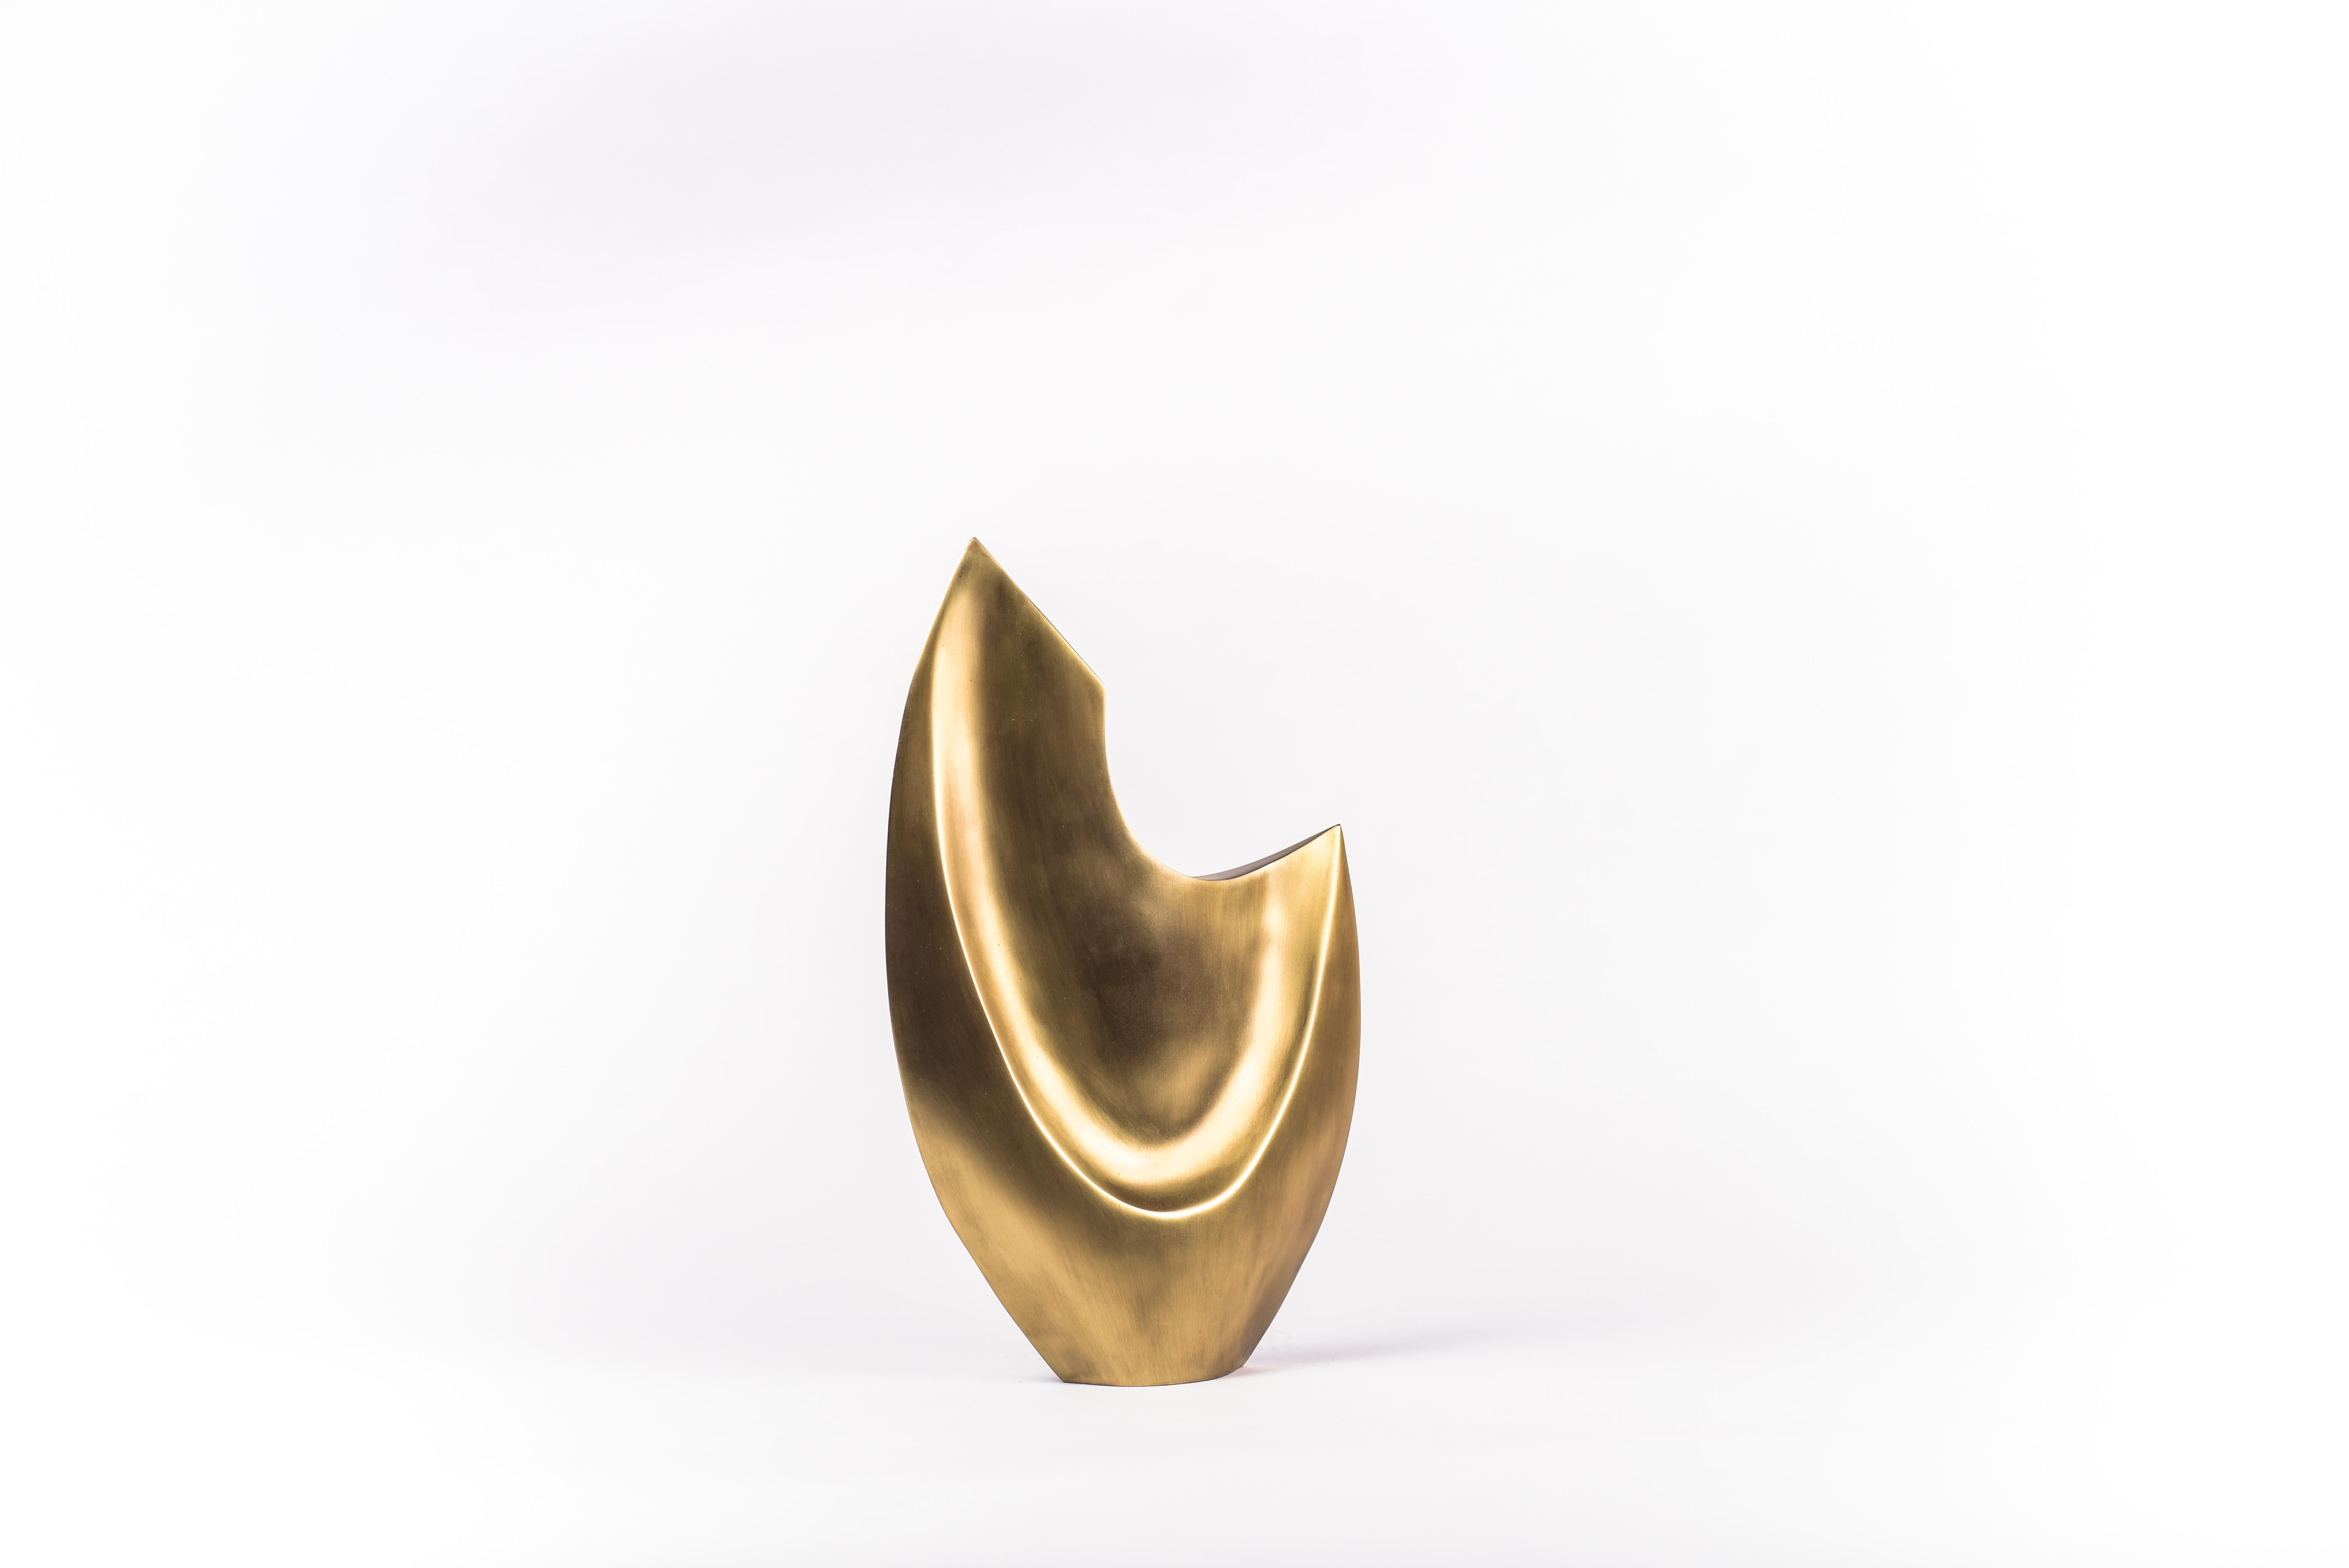 Patrick Coard Paris launches a unique and beautiful sculptural object collection. The Oval Queen is geometric and sleek with it's delicate but defined details. The piece is entirely handcrafted in bronze-patina brass. 

The dimensions of this